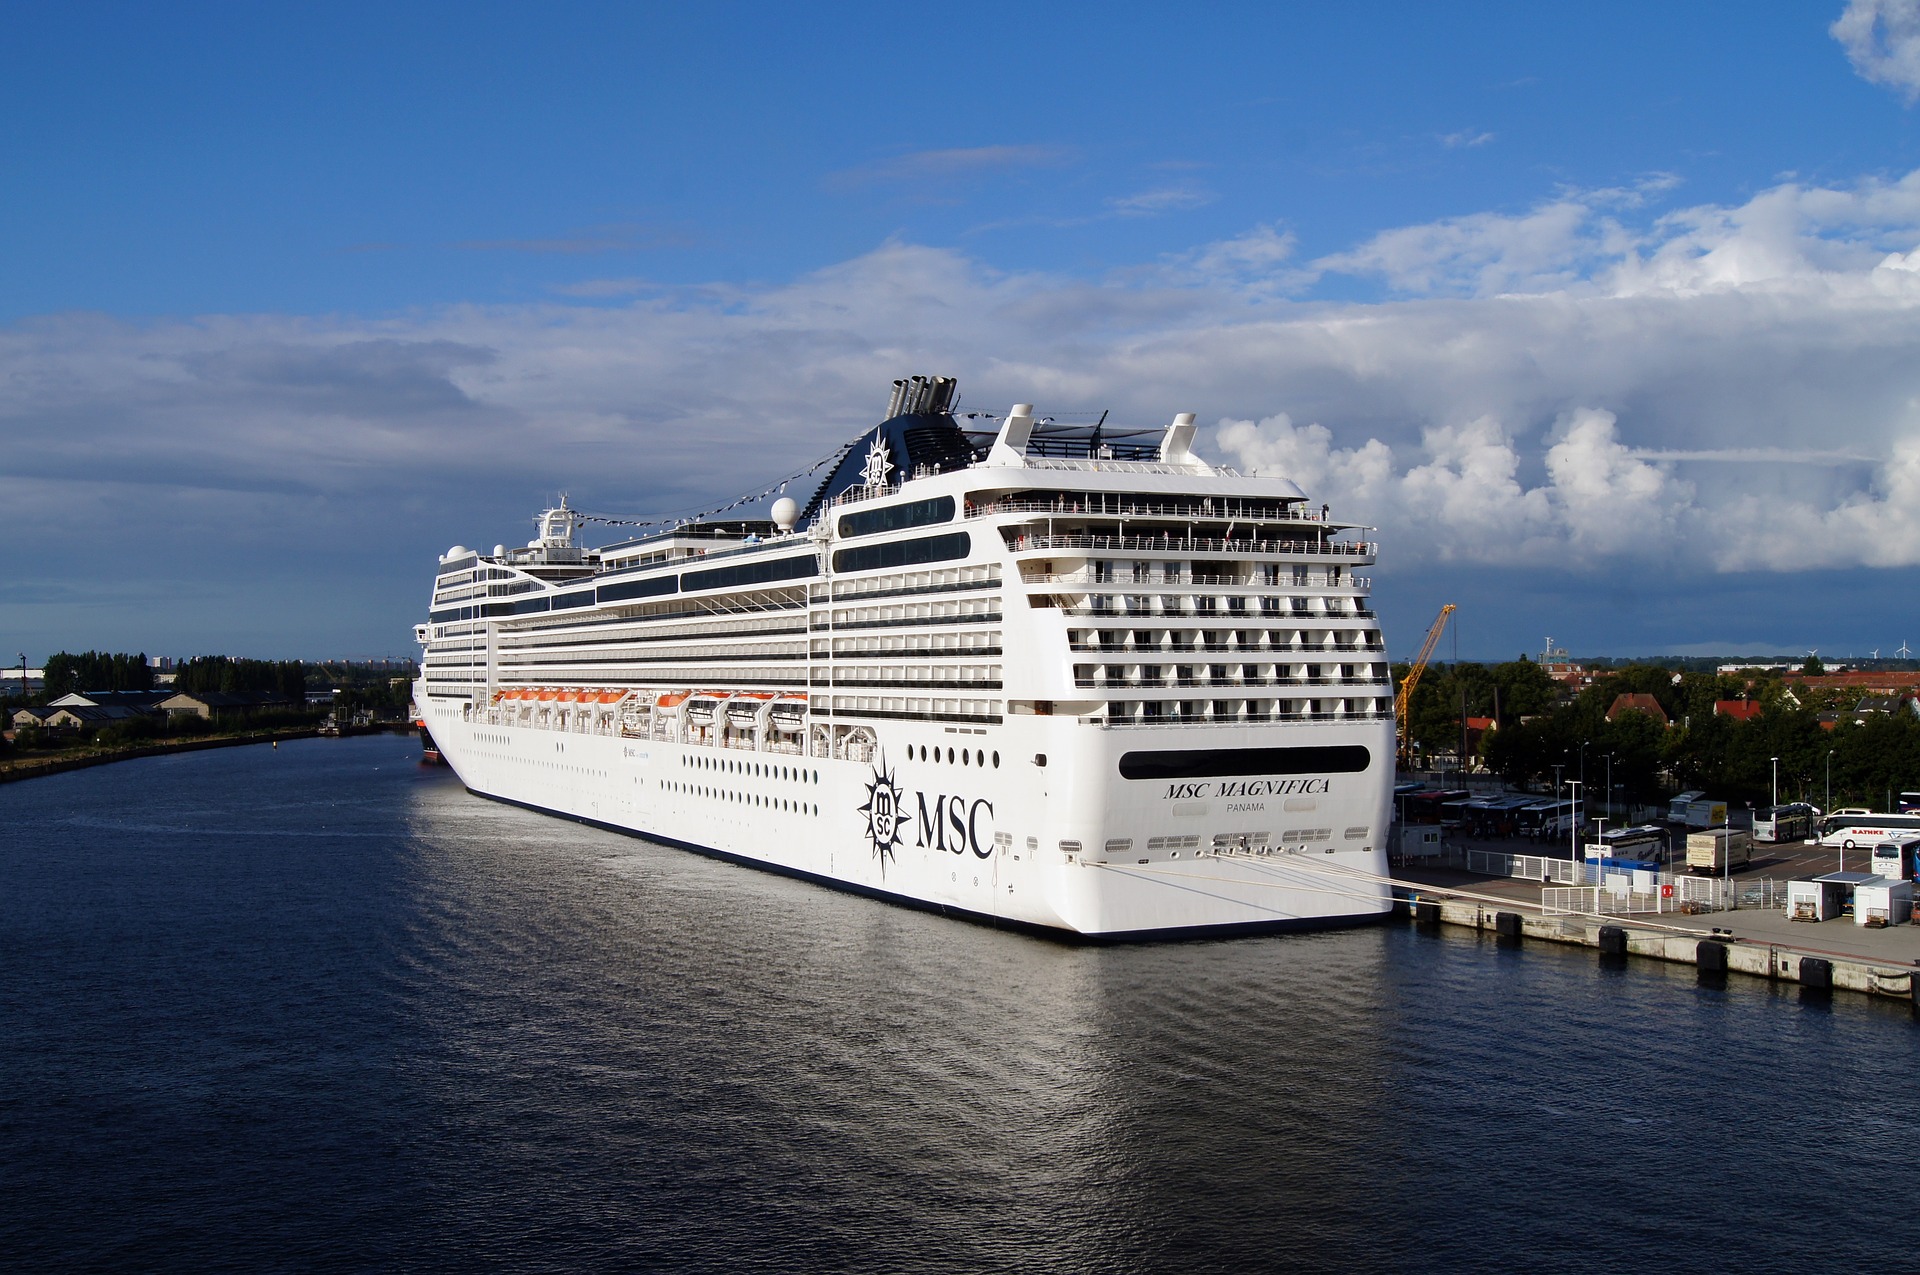 MSC Cruise docked at the port